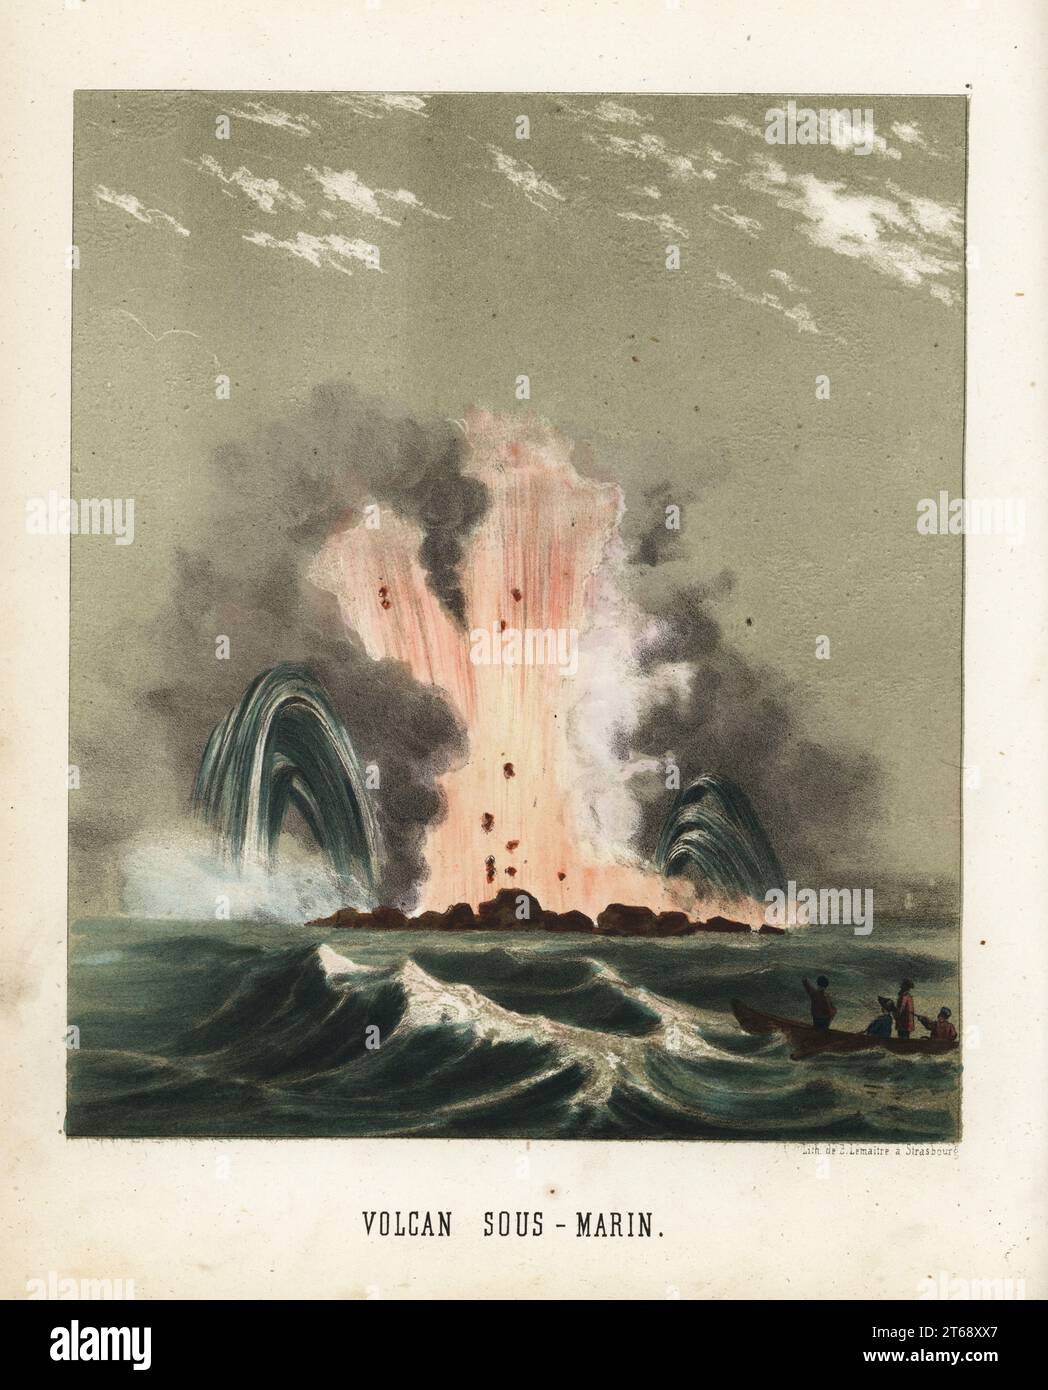 Submarine volcanic eruption. Tourists in rowboats watching an explosive eruption. Volcan sous-marin. Handcolored lithograph by Emile Lemaitre from Munerelles Les Phenomenes et Curiosites de la Nature (Natural Phenomena and Curiosities), Libraire Derivaux, Strasbourg, 1856. Stock Photo